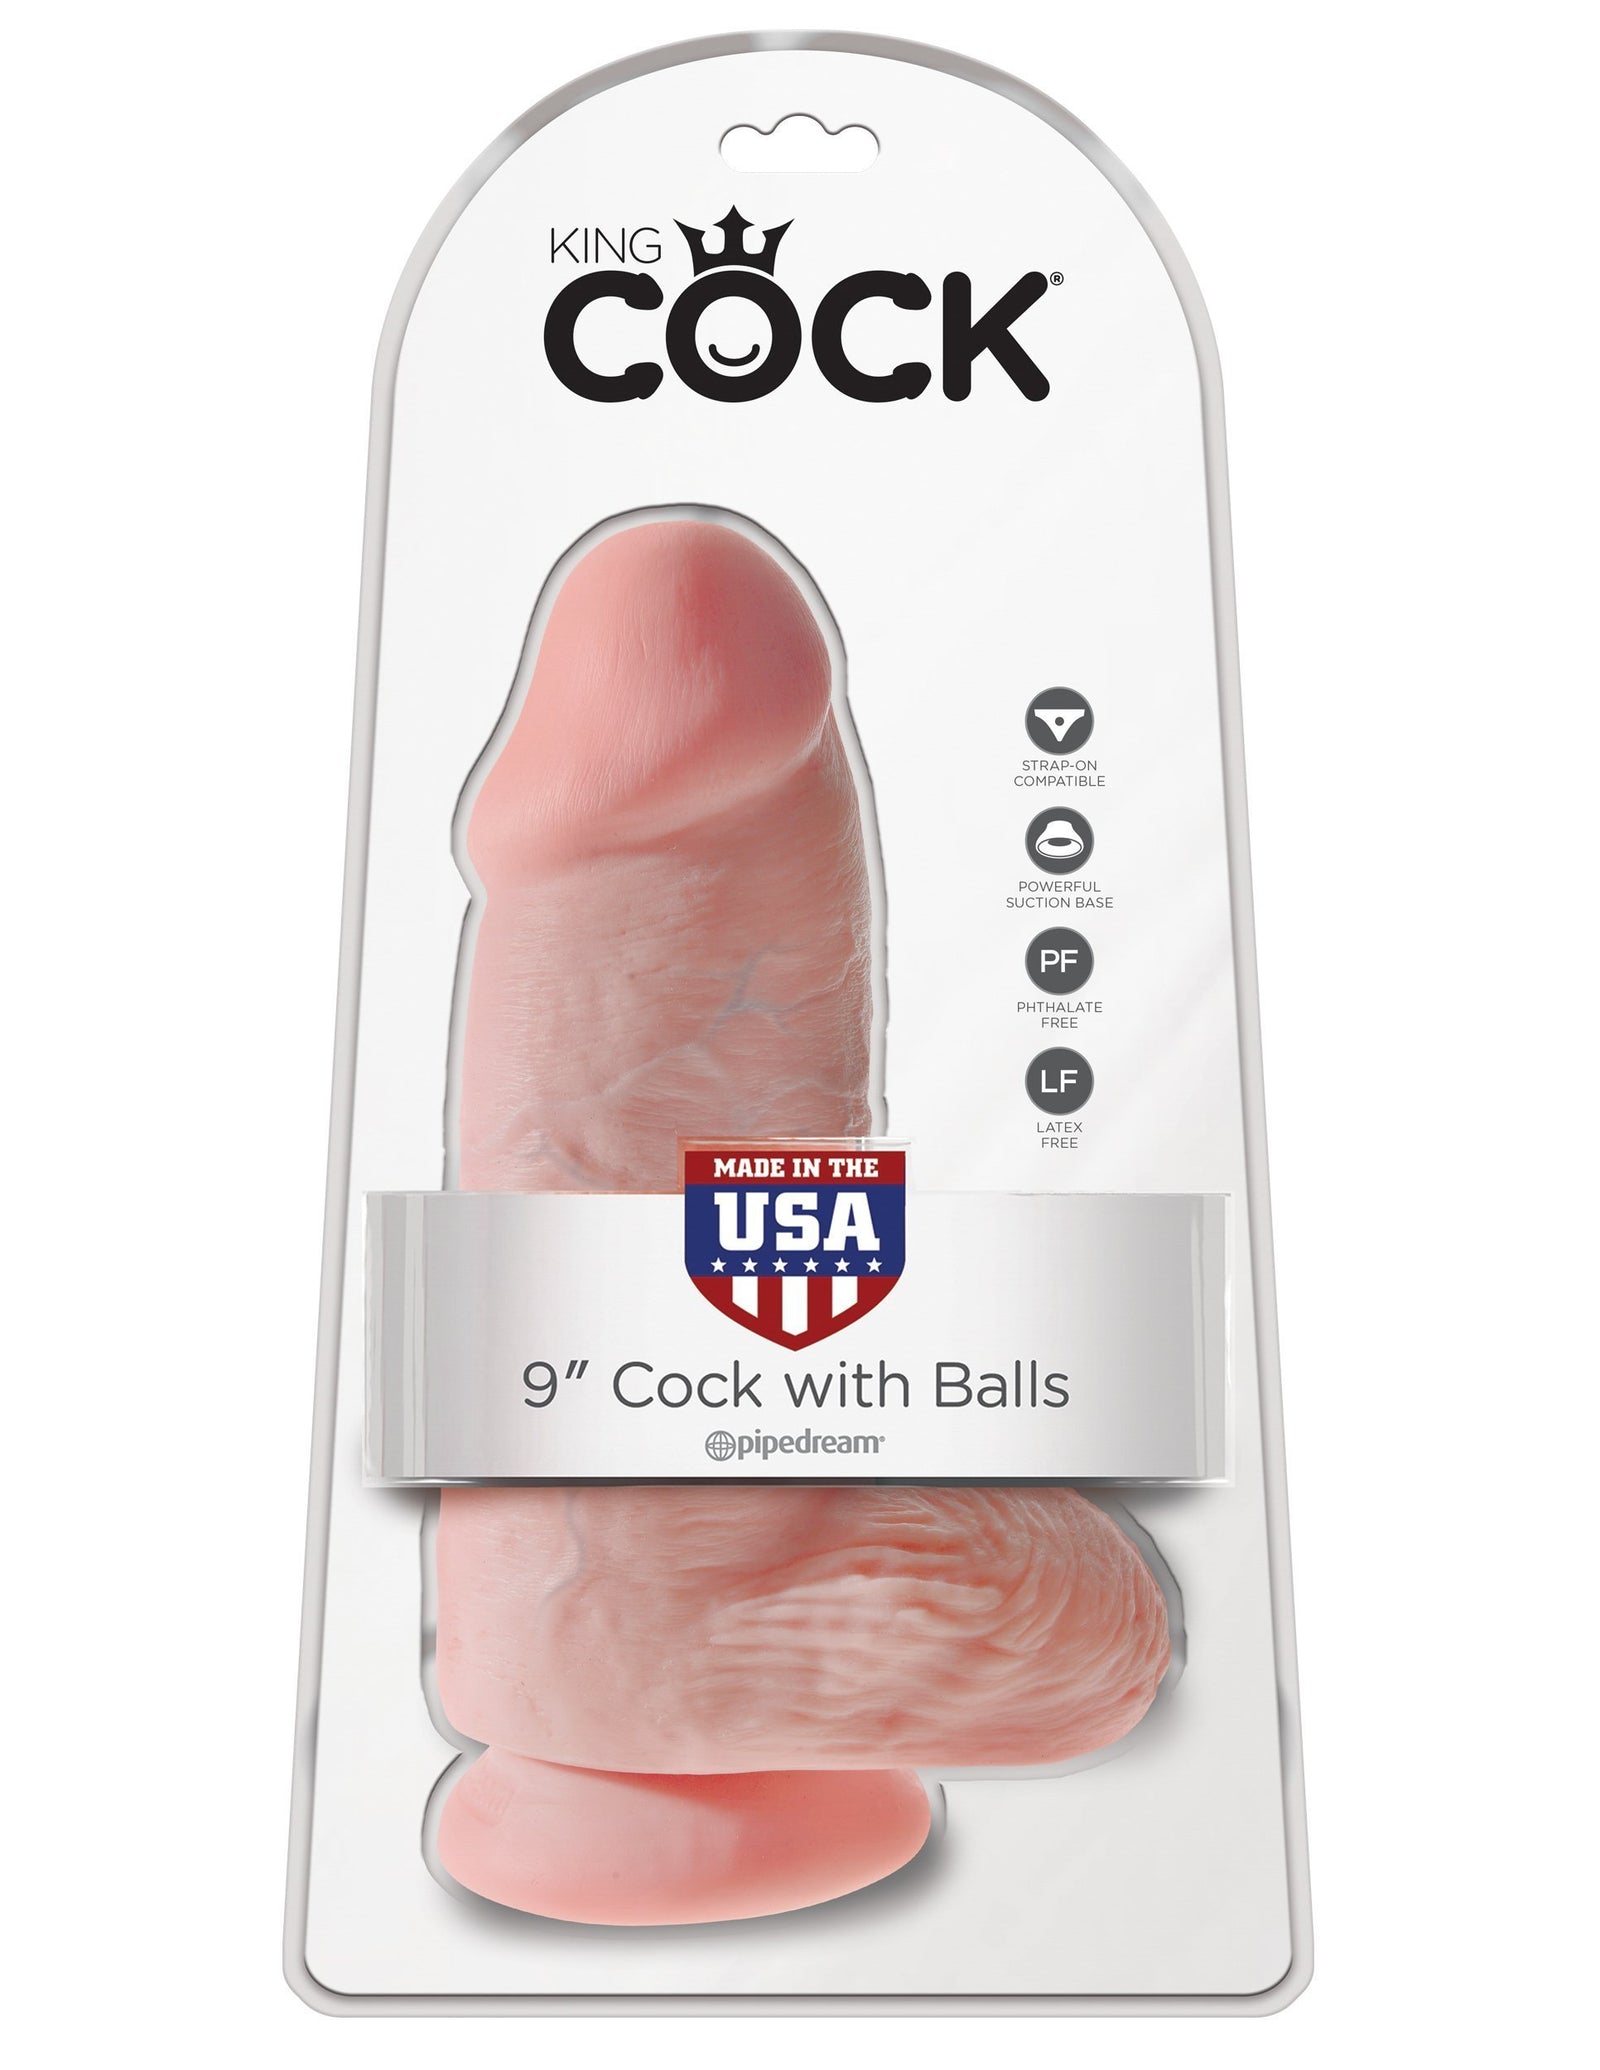 Pipedream - King Cock Chubby Cock with Balls (Beige) Realistic Dildo with suction cup (Non Vibration) Singapore